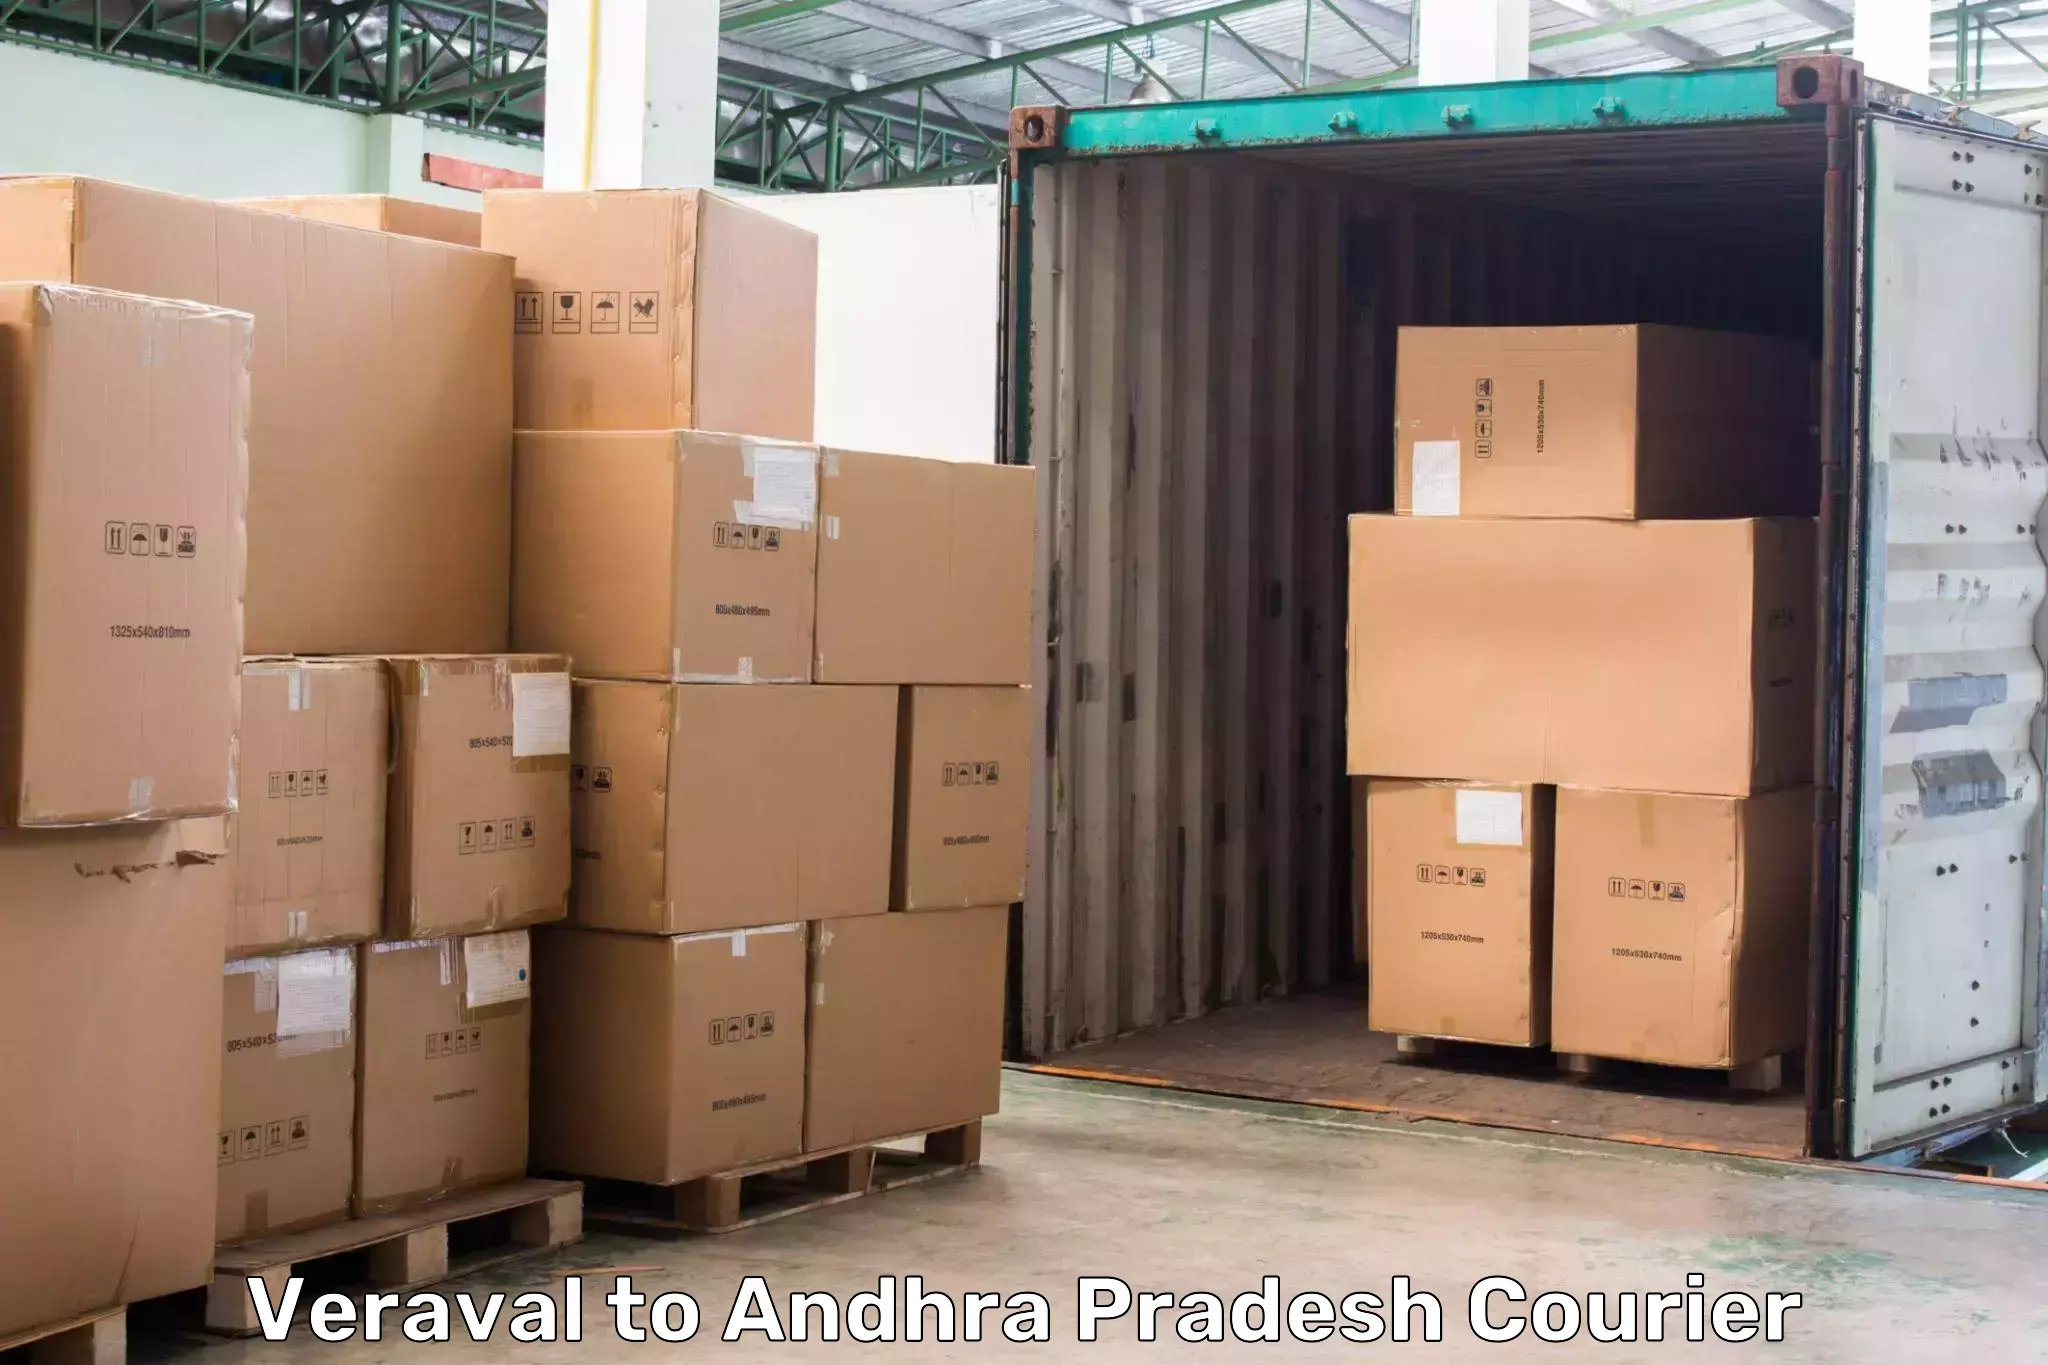 Global shipping networks Veraval to Bhattiprolu